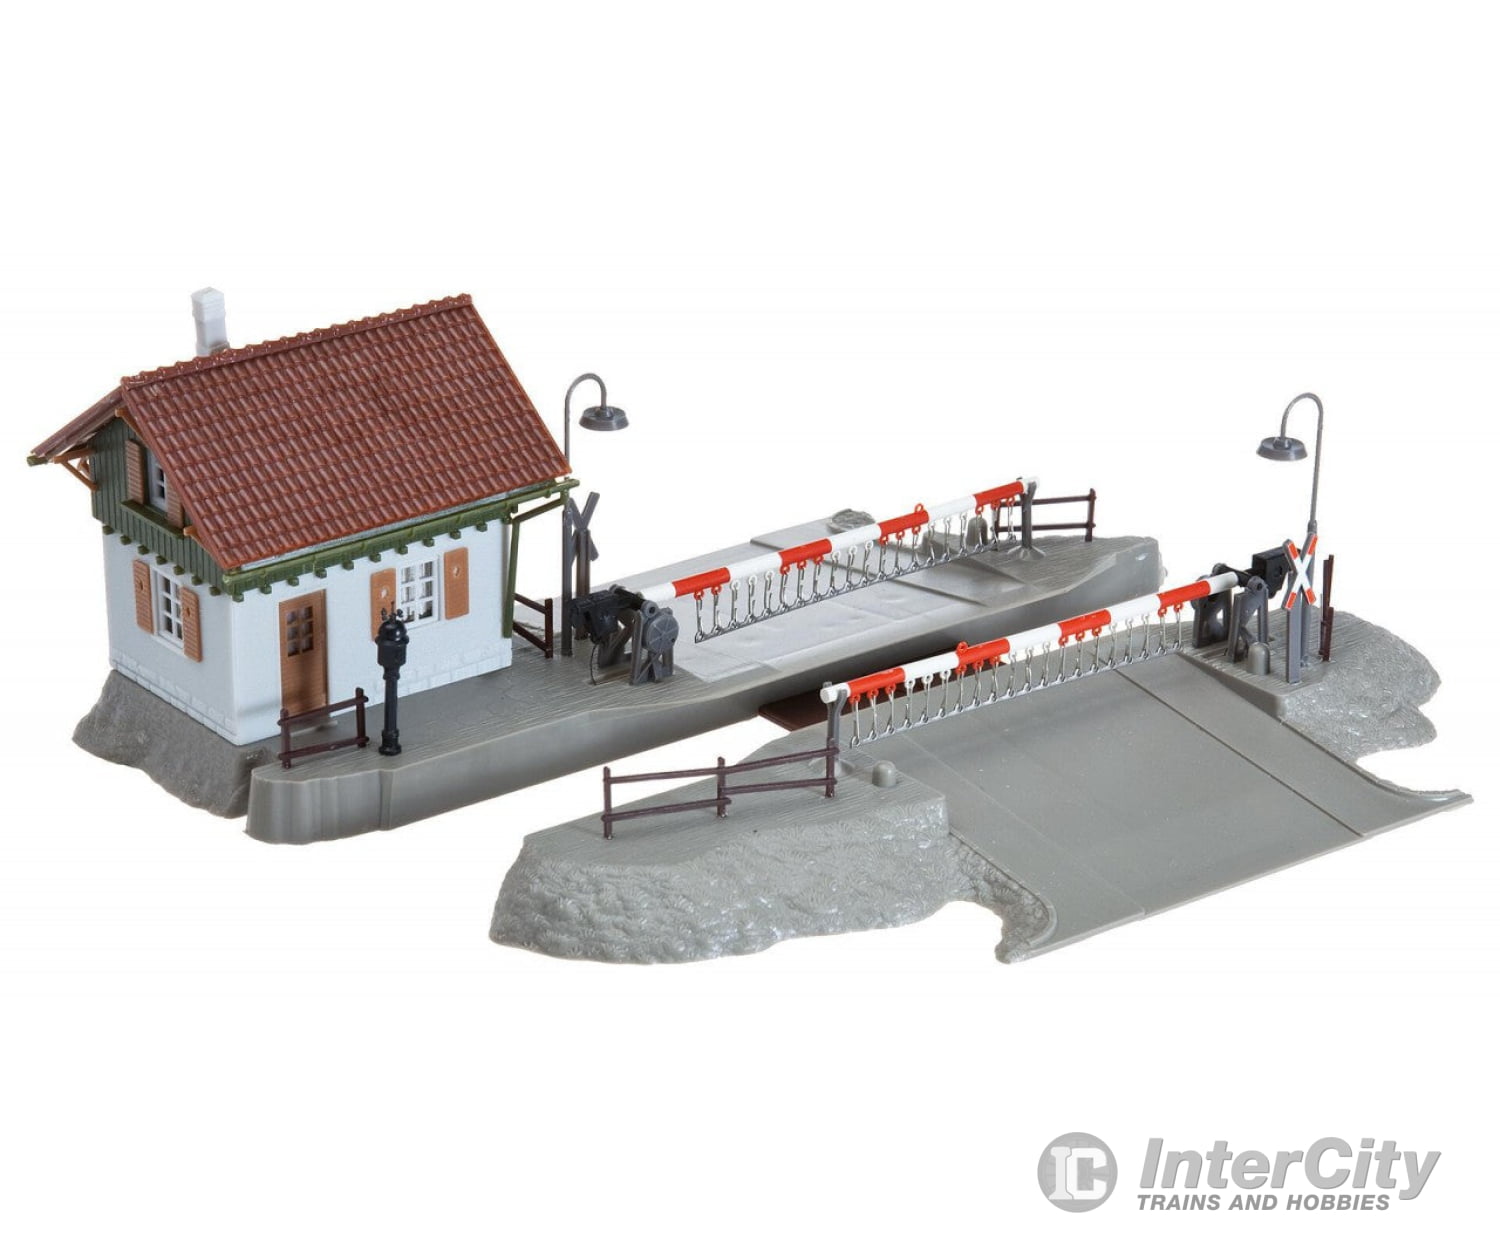 Faller 120174 Ho Level-Crossing With Gatekeeper’s House Structures